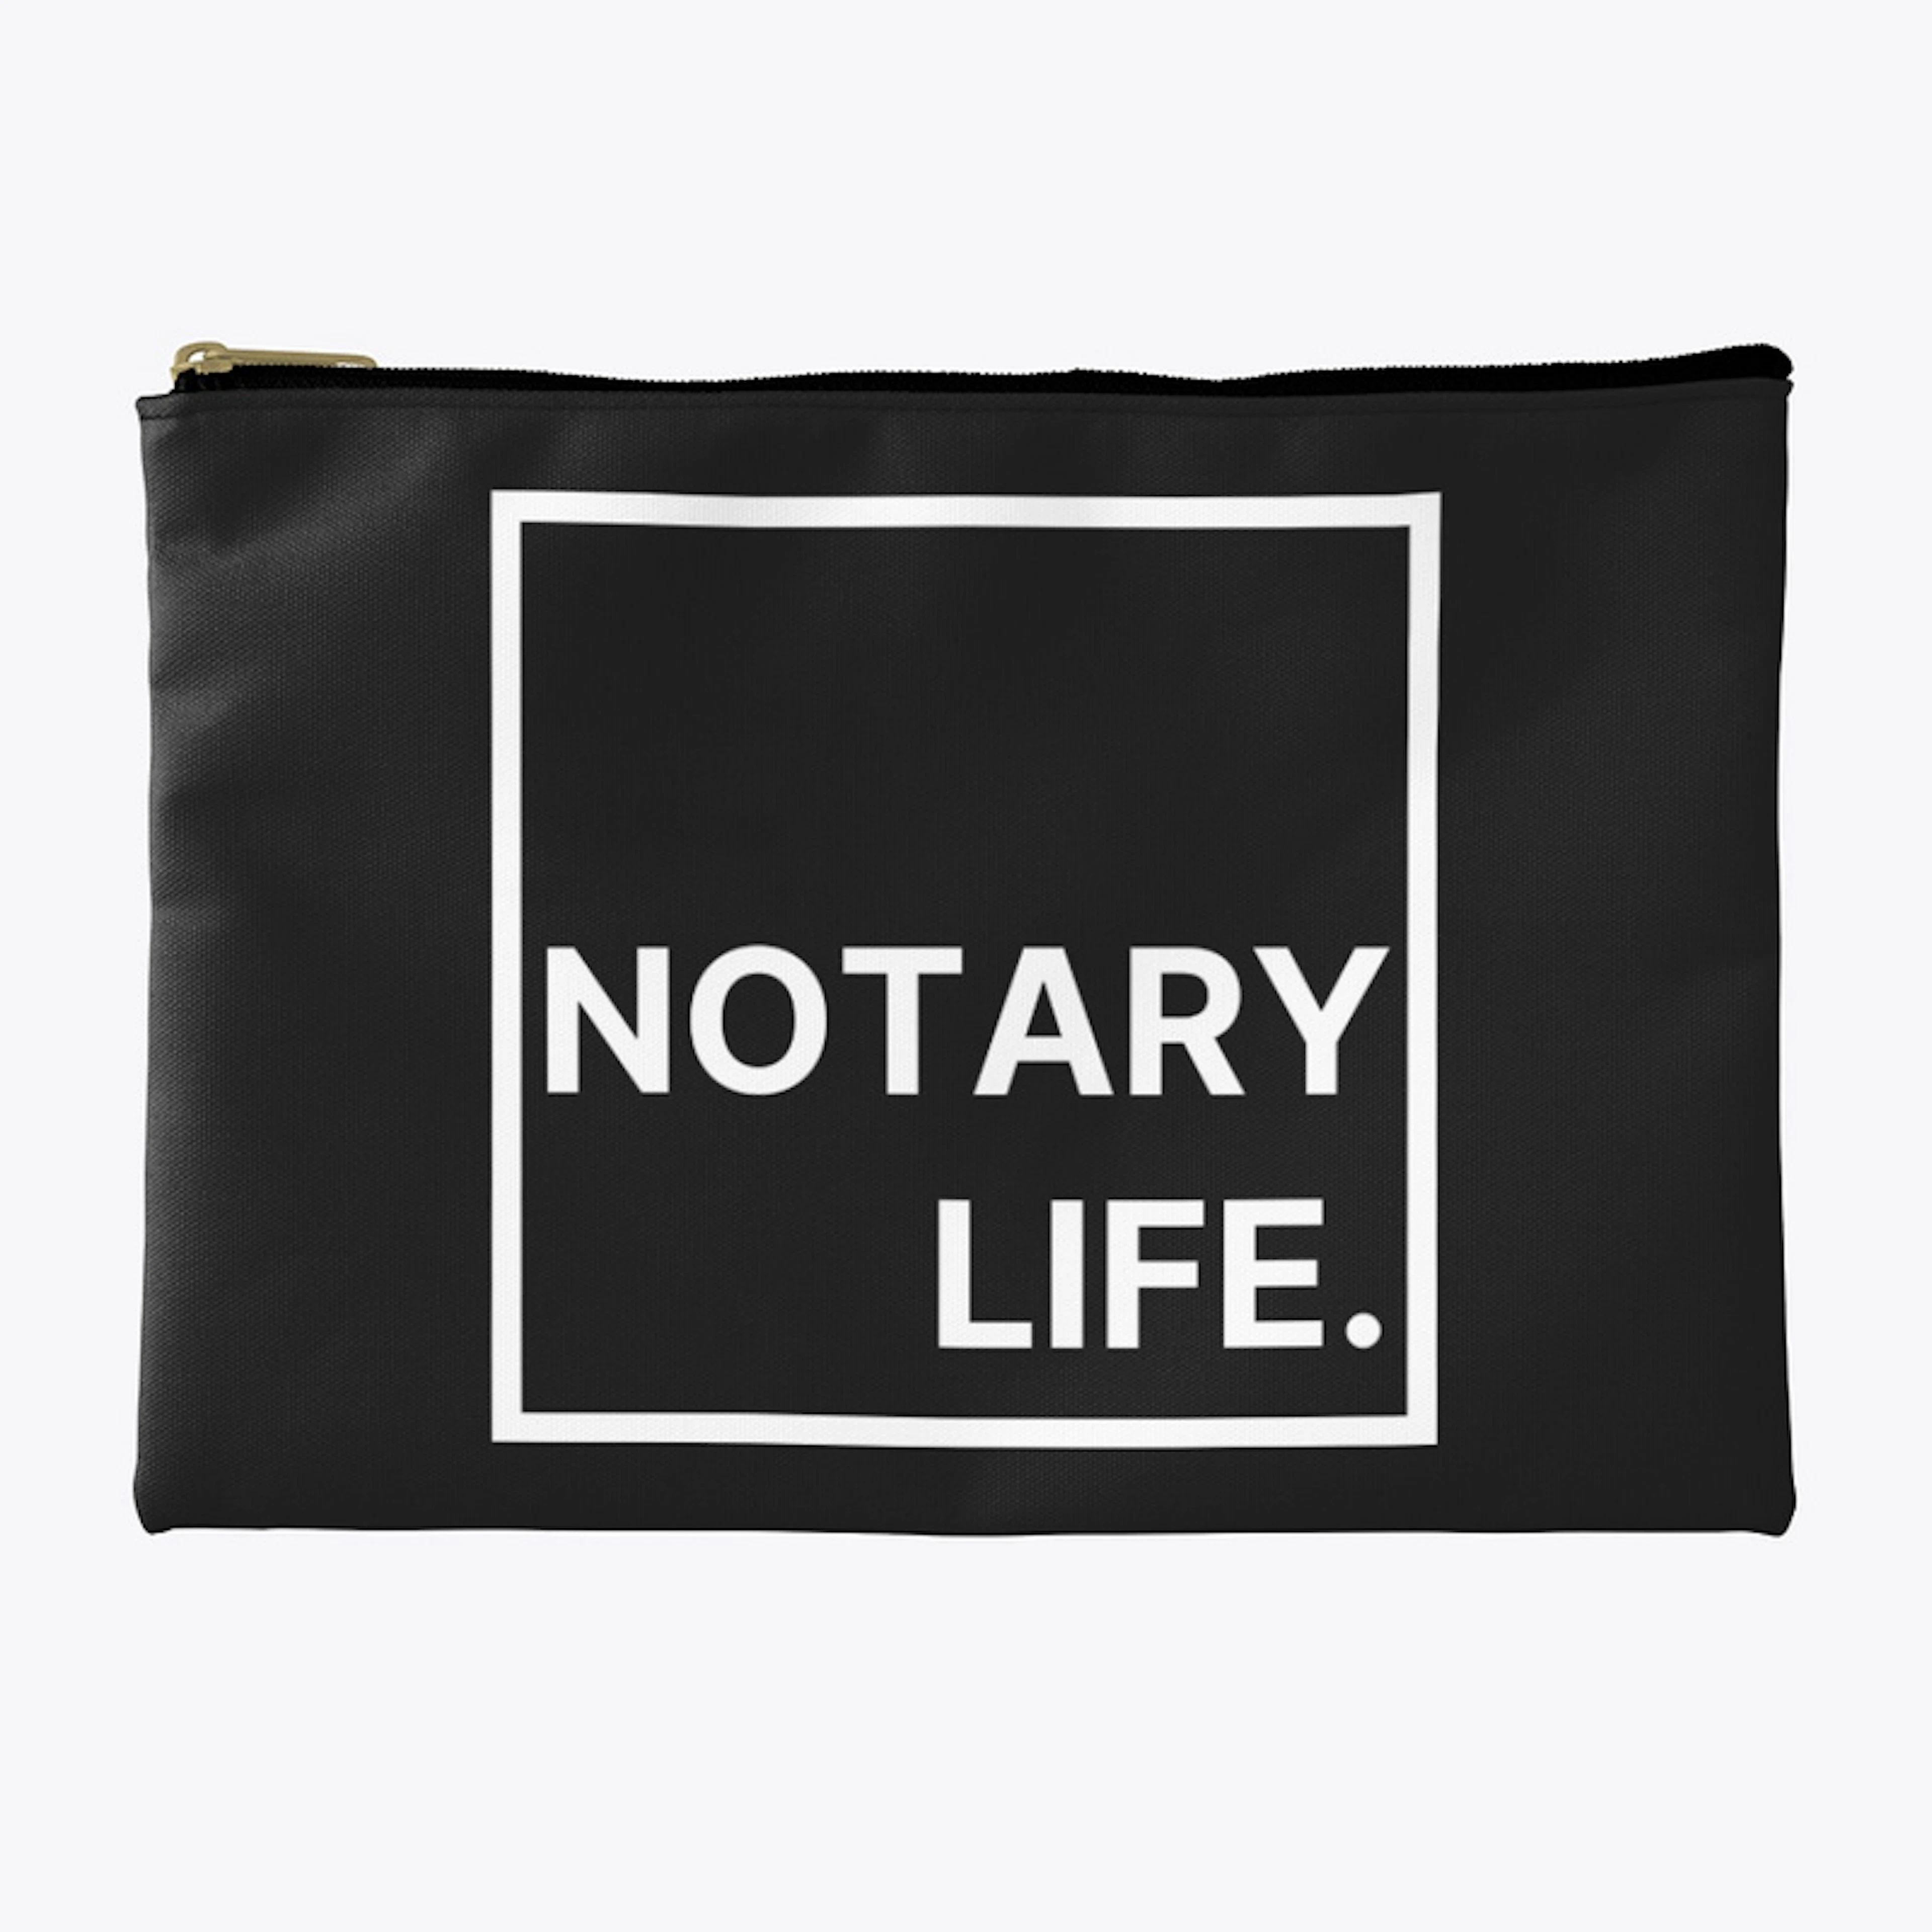 Notary Life. Accessory Pouch